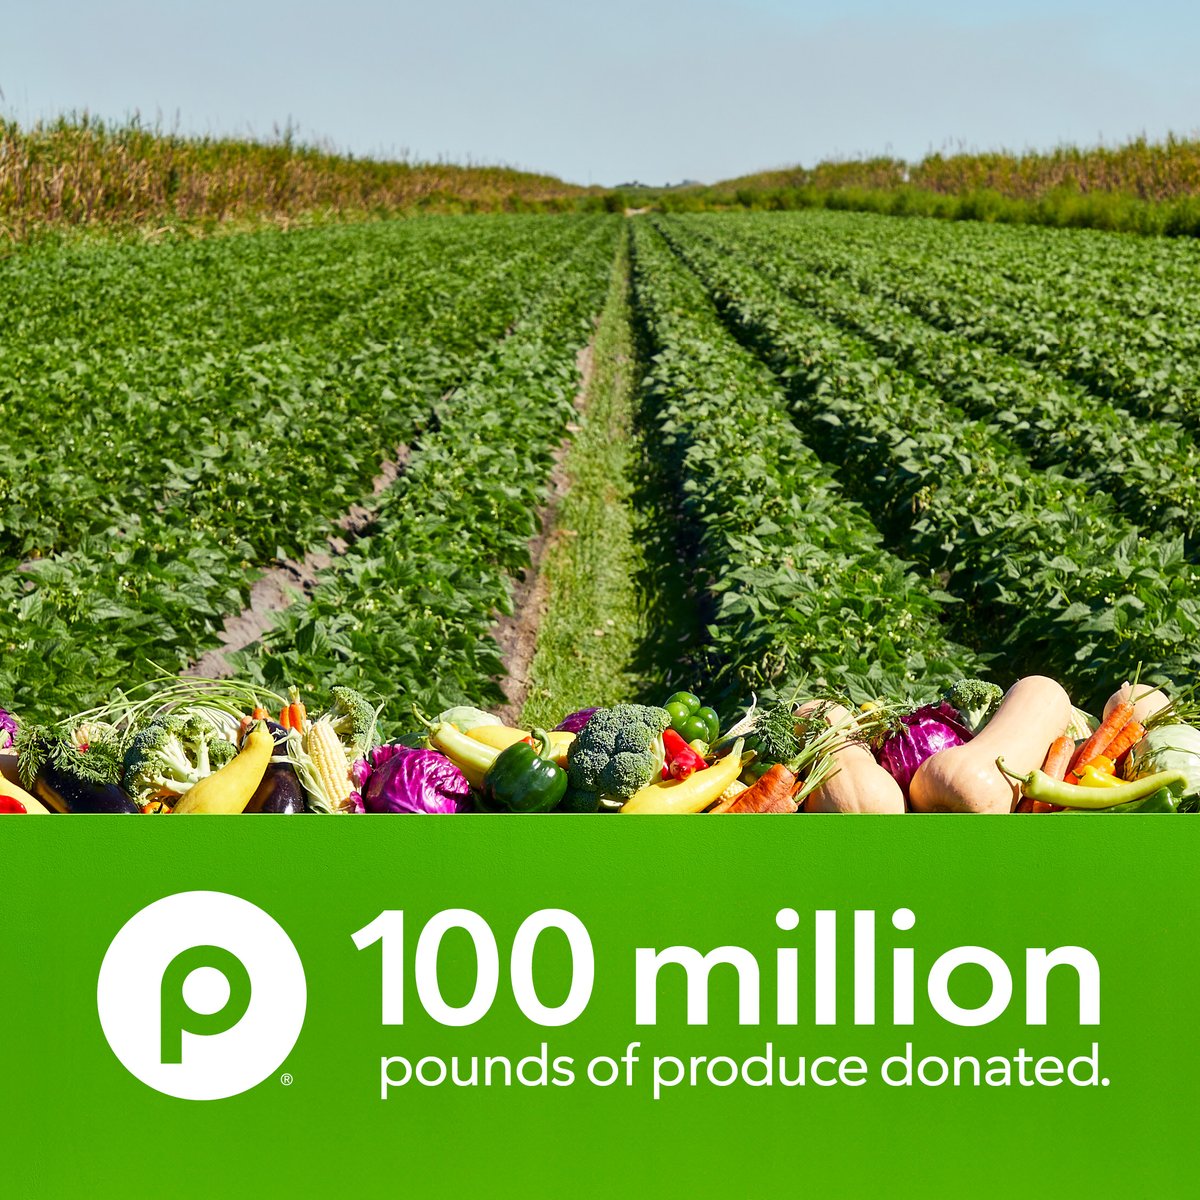 Congratulations to @Publix for reaching a milestone of 100 million pounds of donated produce to the @FeedingAmerica network since 2020, including more than 360k pounds to us, since initiating a partnership in 2023! This is truly a great partnership!
#GoodTogether